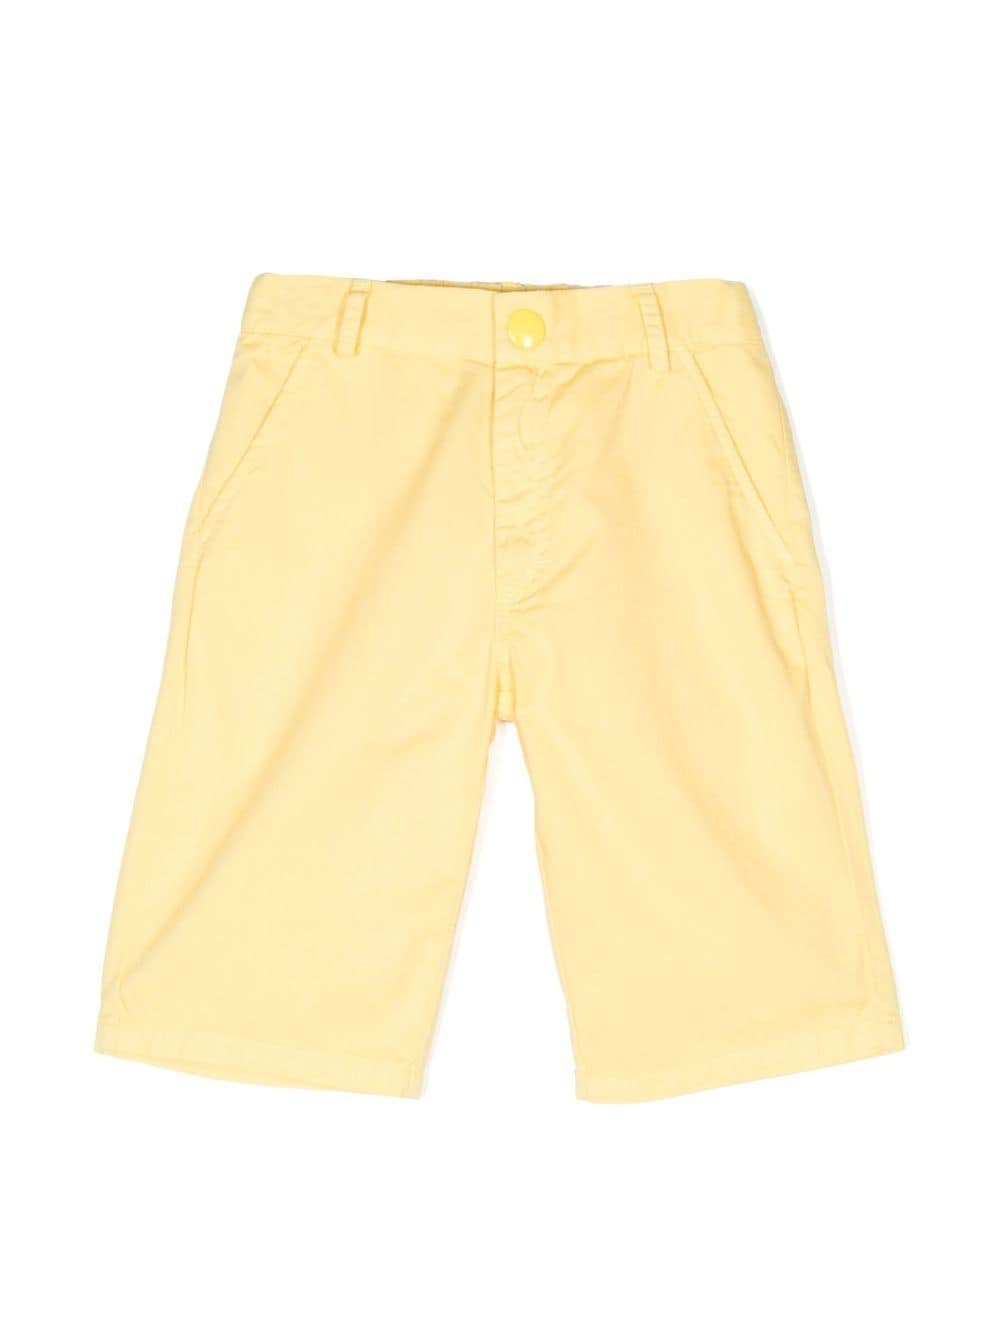 KINDRED tonal organic cotton shorts - Yellow von KINDRED